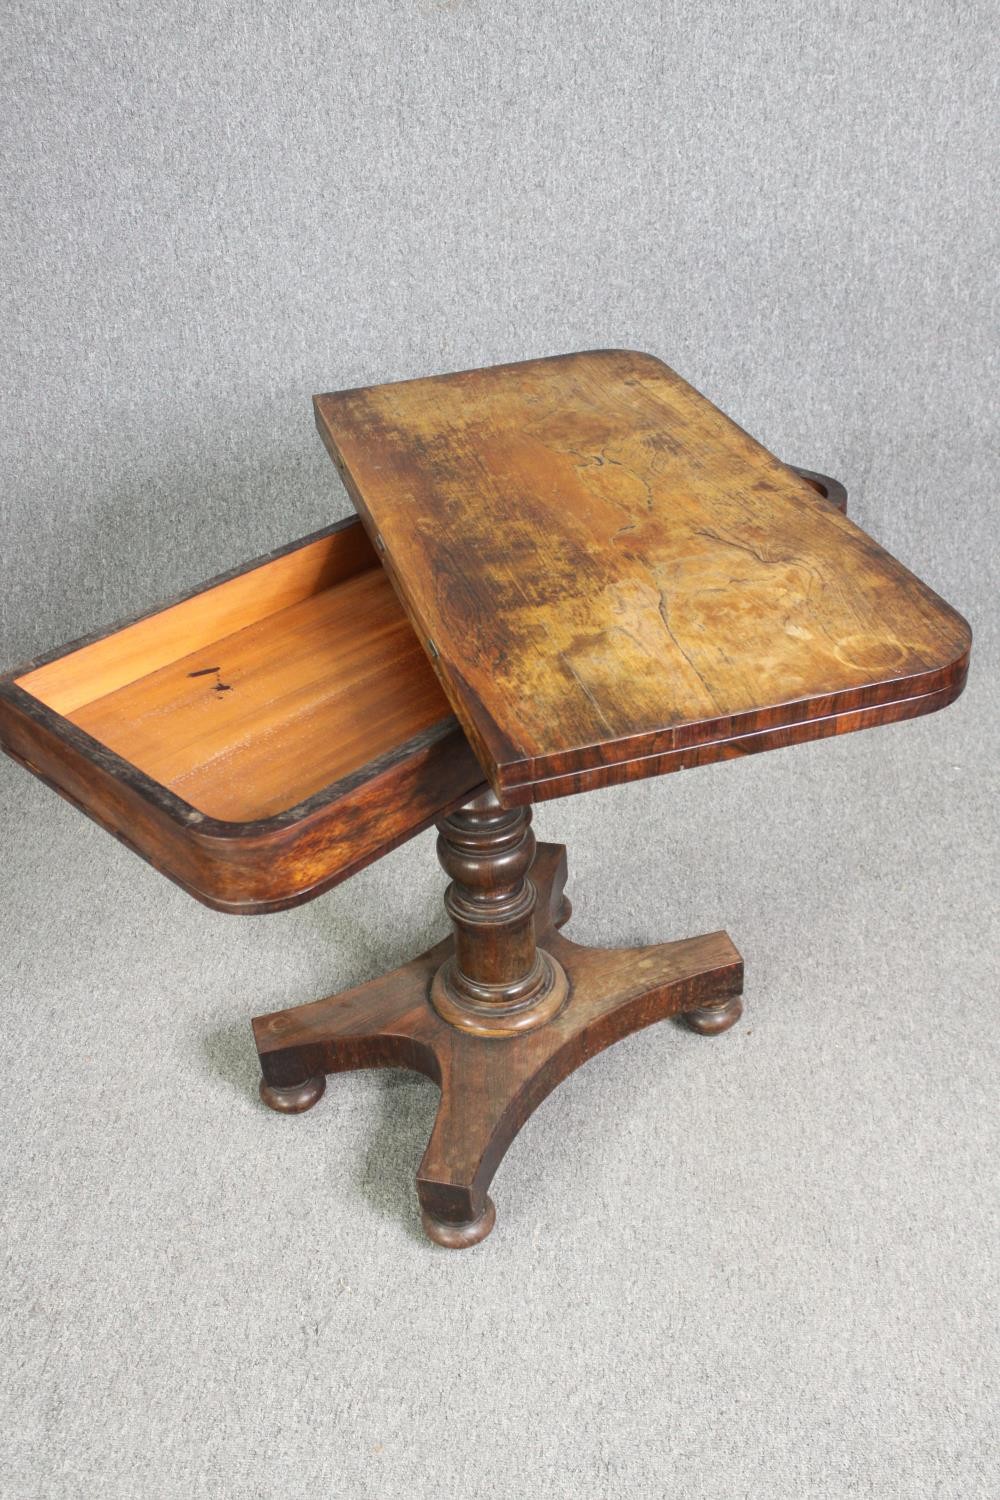 Card table, early 19th century rosewood with foldover swivel action. H.74 W.92 D.92cm (ext). - Image 7 of 7